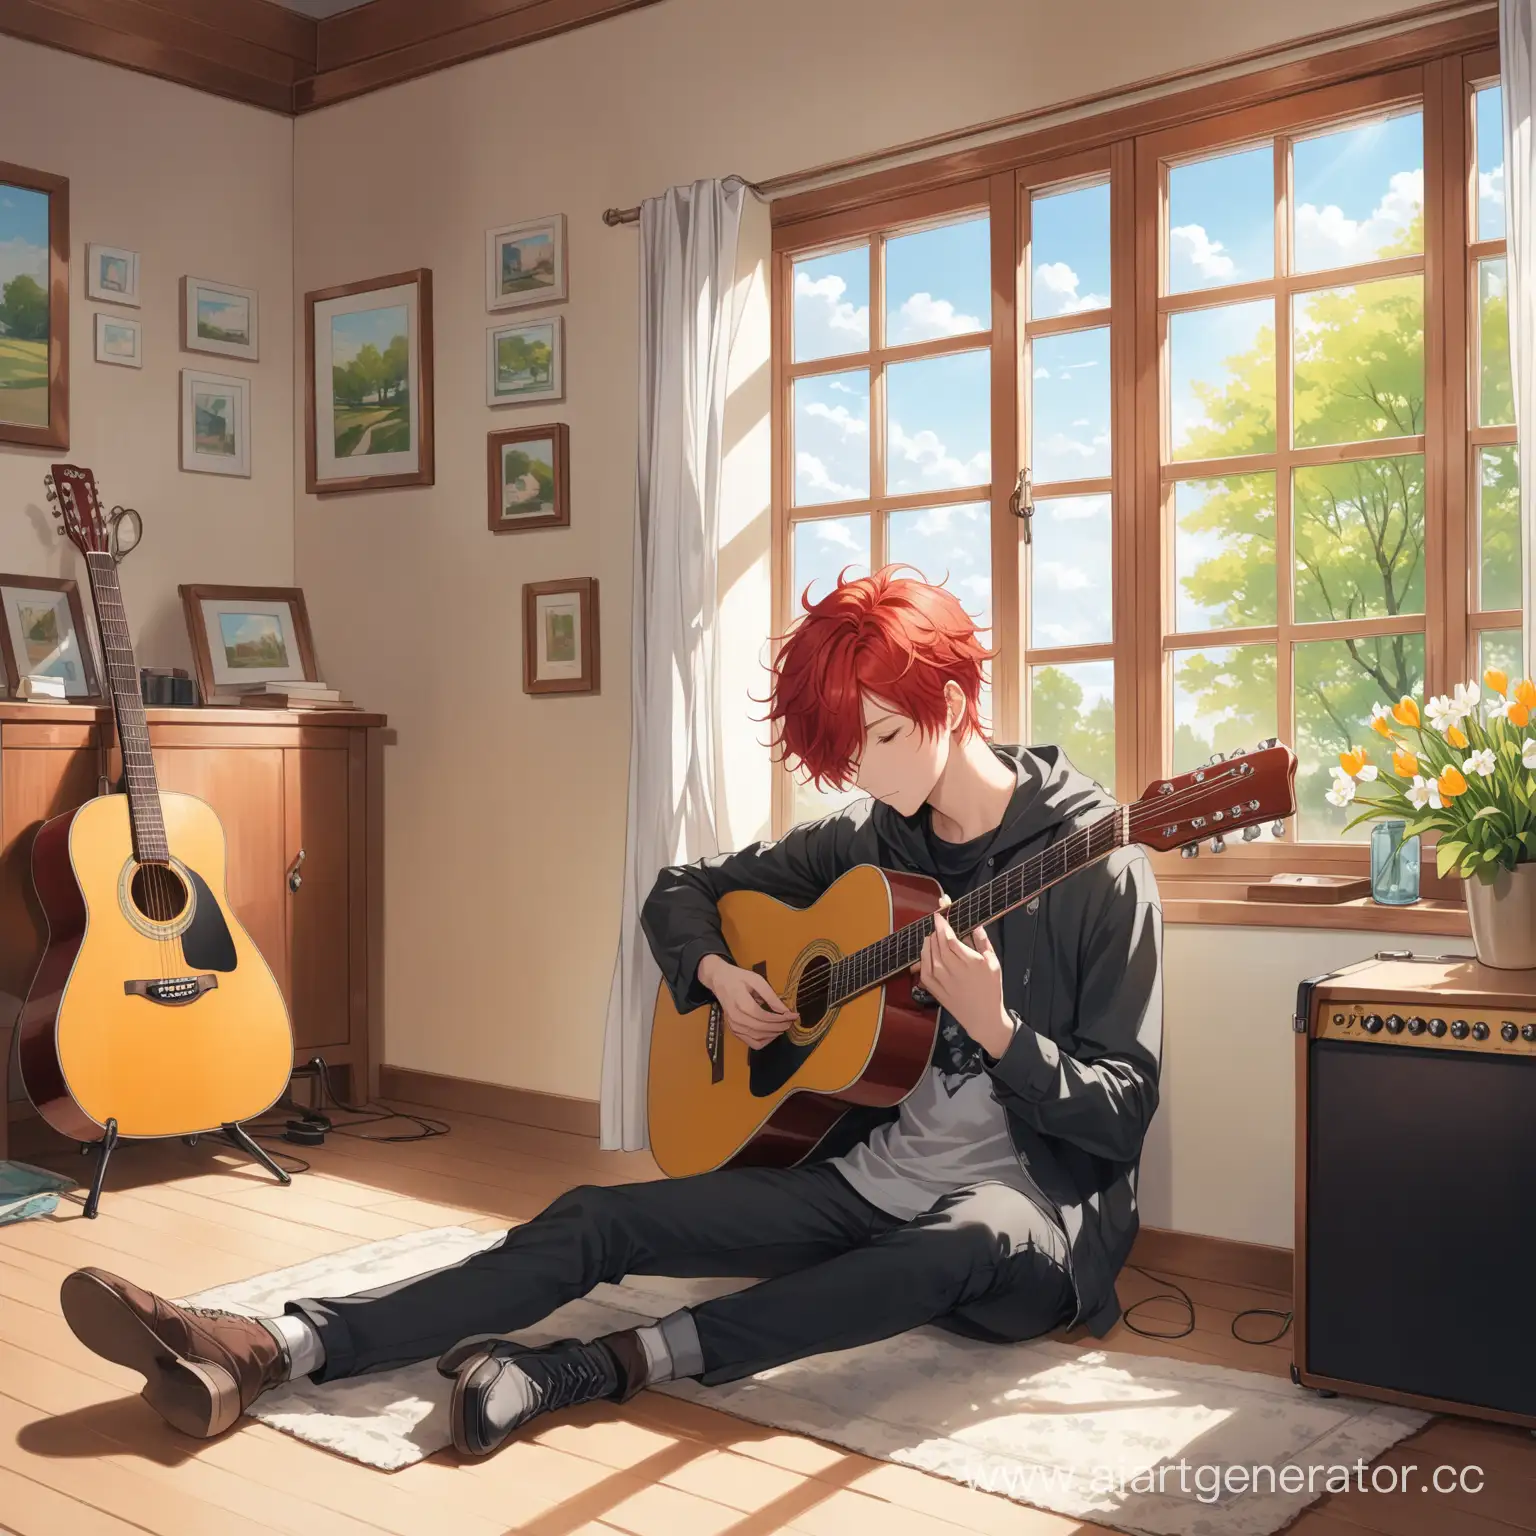 Redhaired-Boy-Playing-Guitar-in-a-Springthemed-Room-by-the-Window